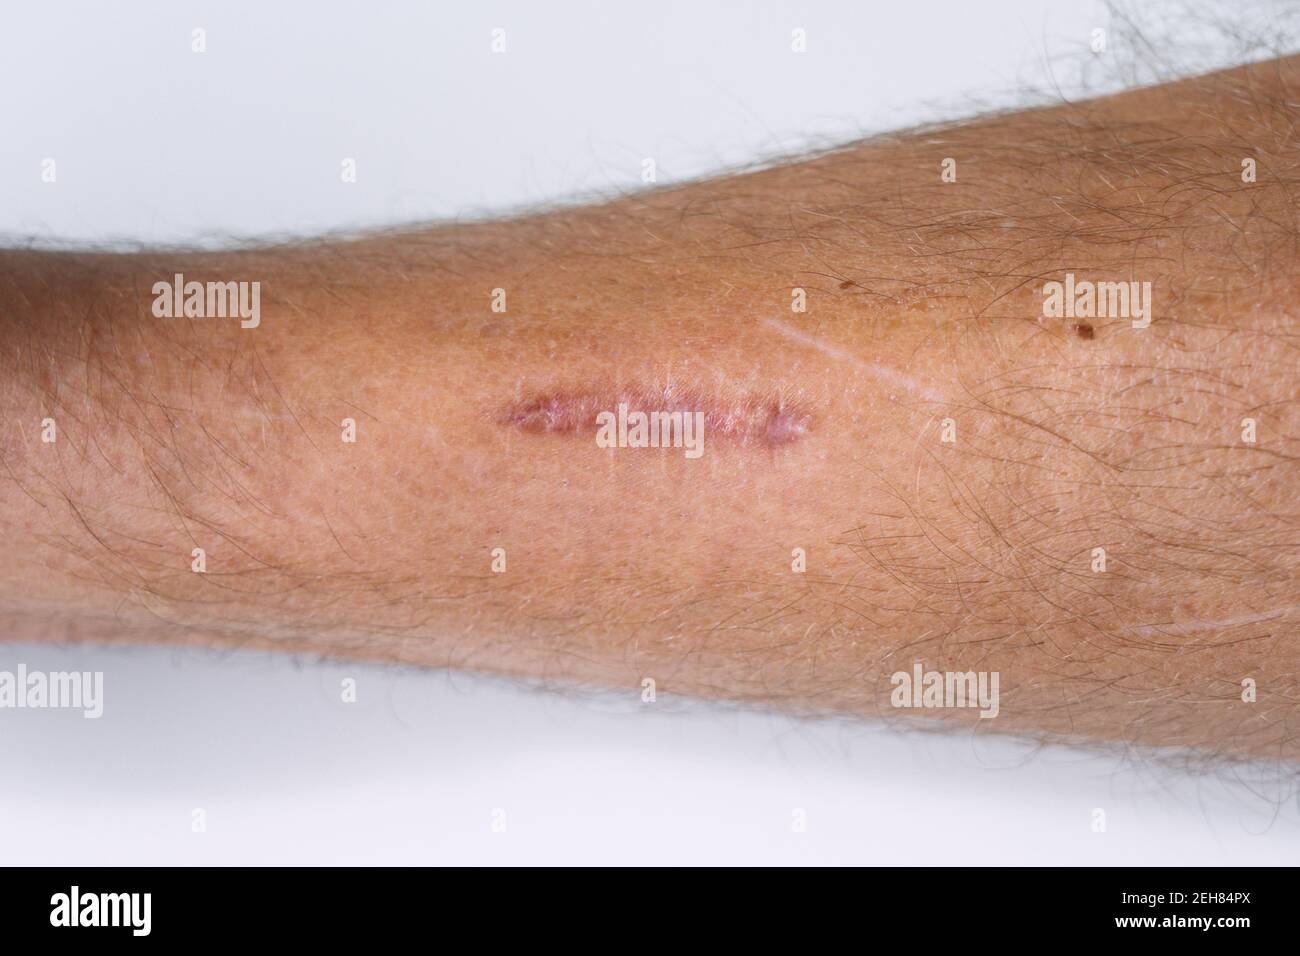 Mans leg with scar after stitched wound. Scar that was raised after being sewn Stock Photo